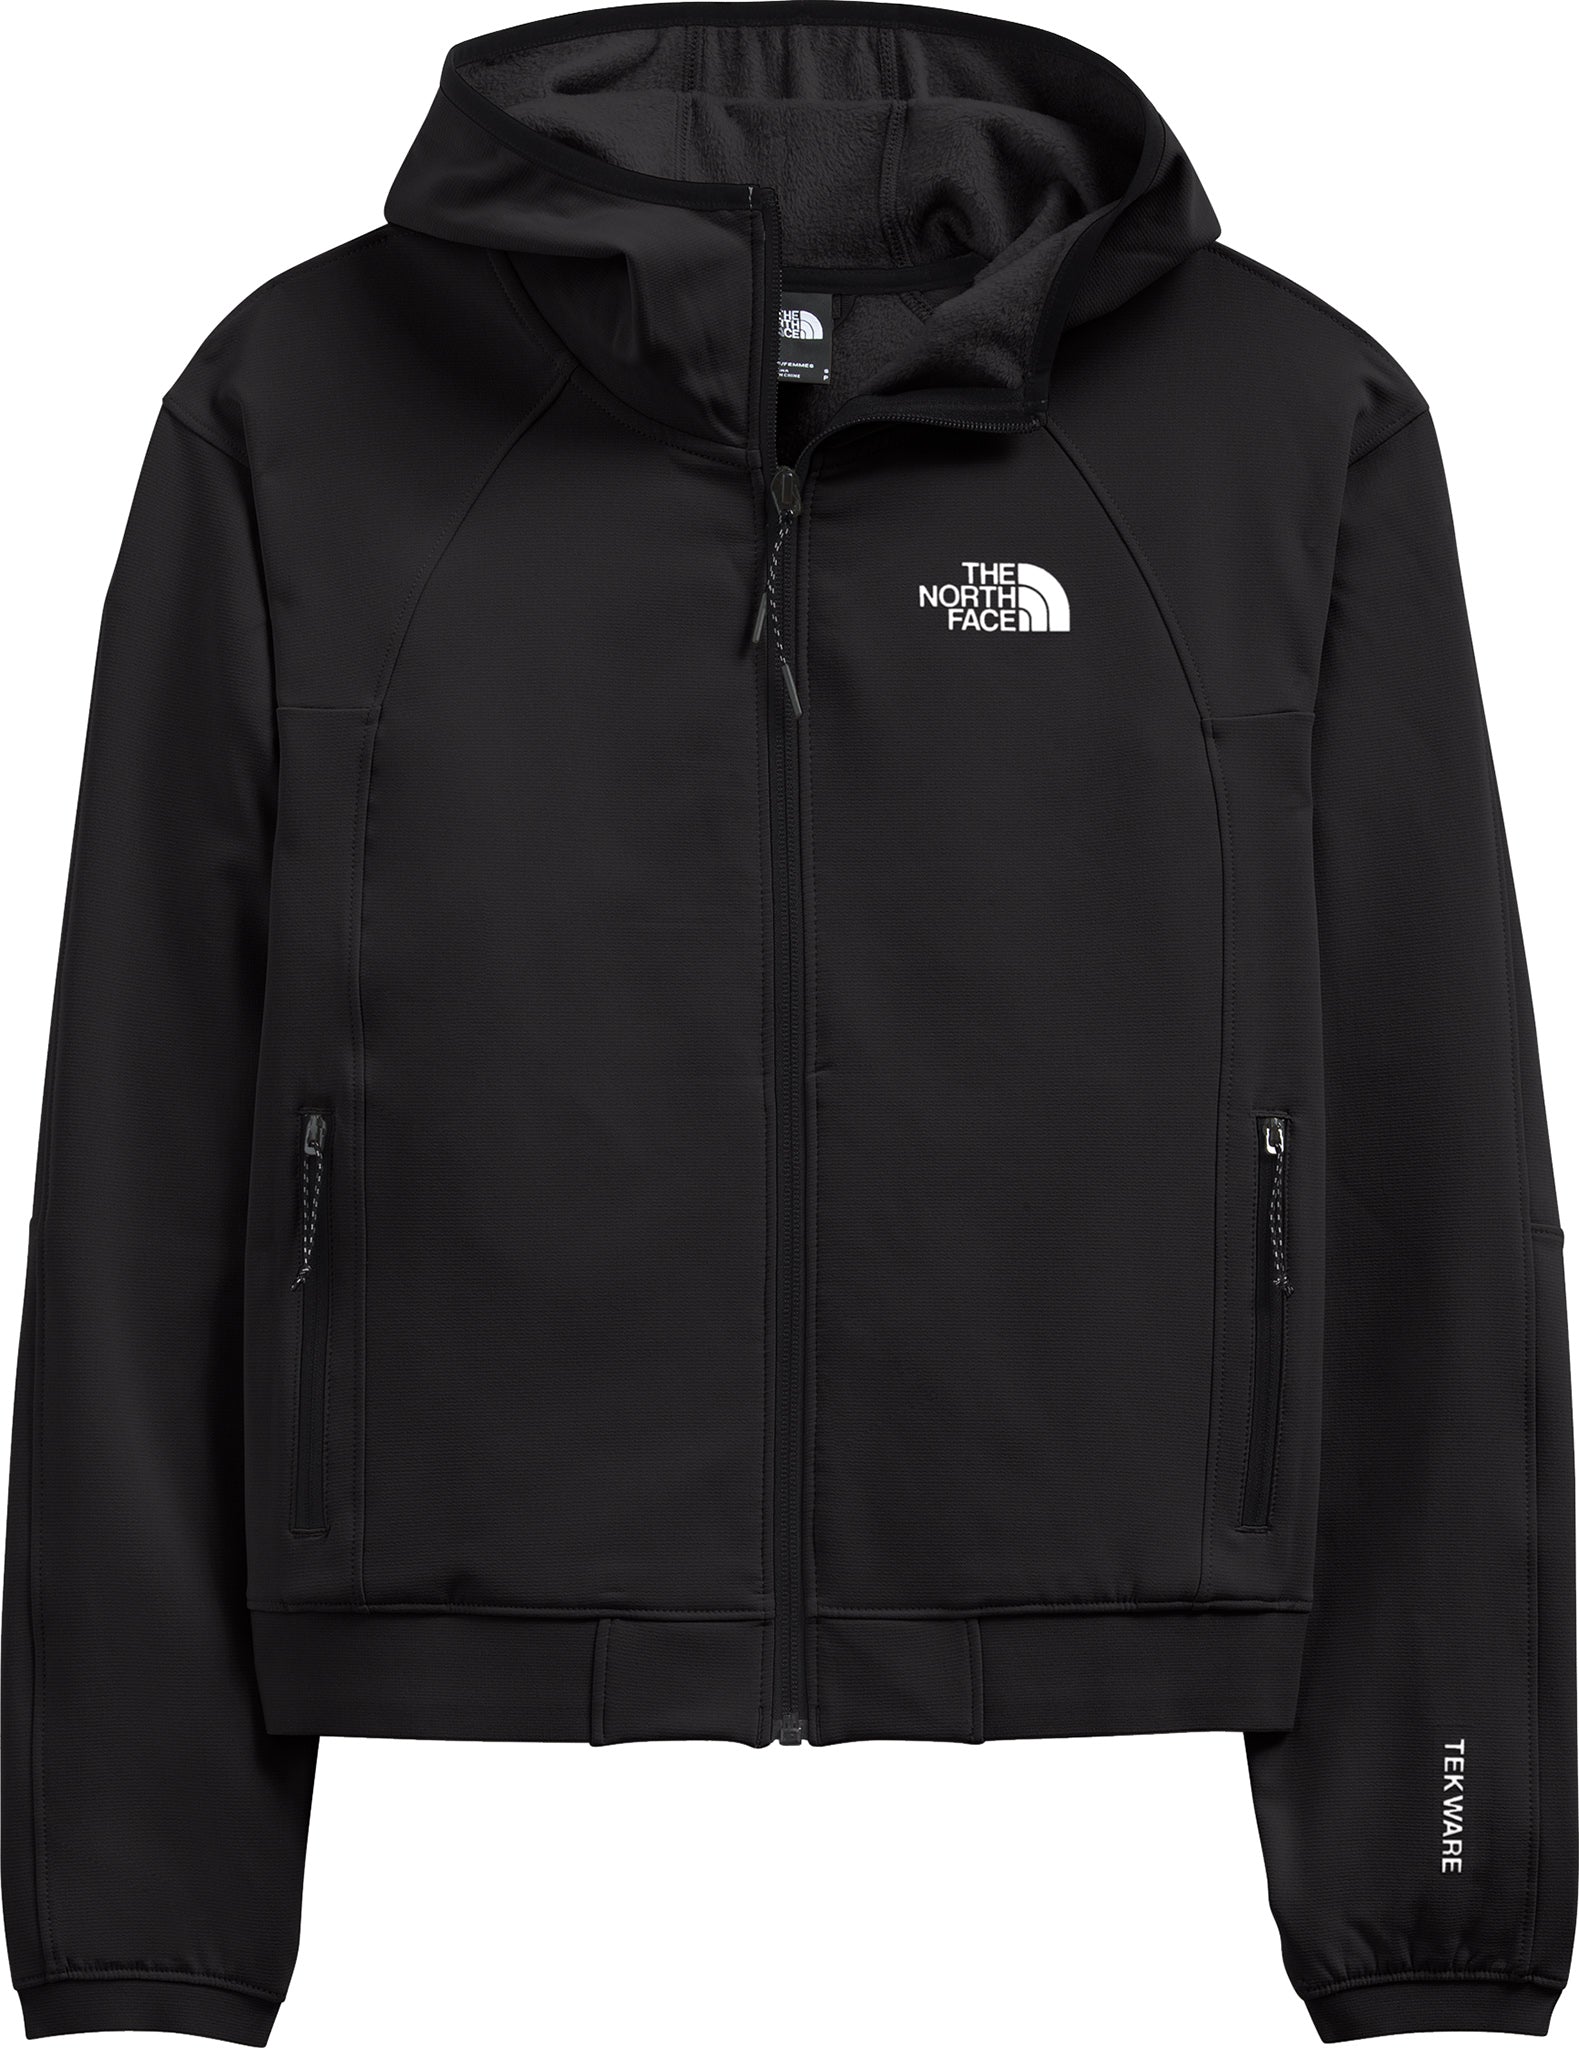 The North Face Tekware Full Zip Hoodie - Women’s | Altitude Sports